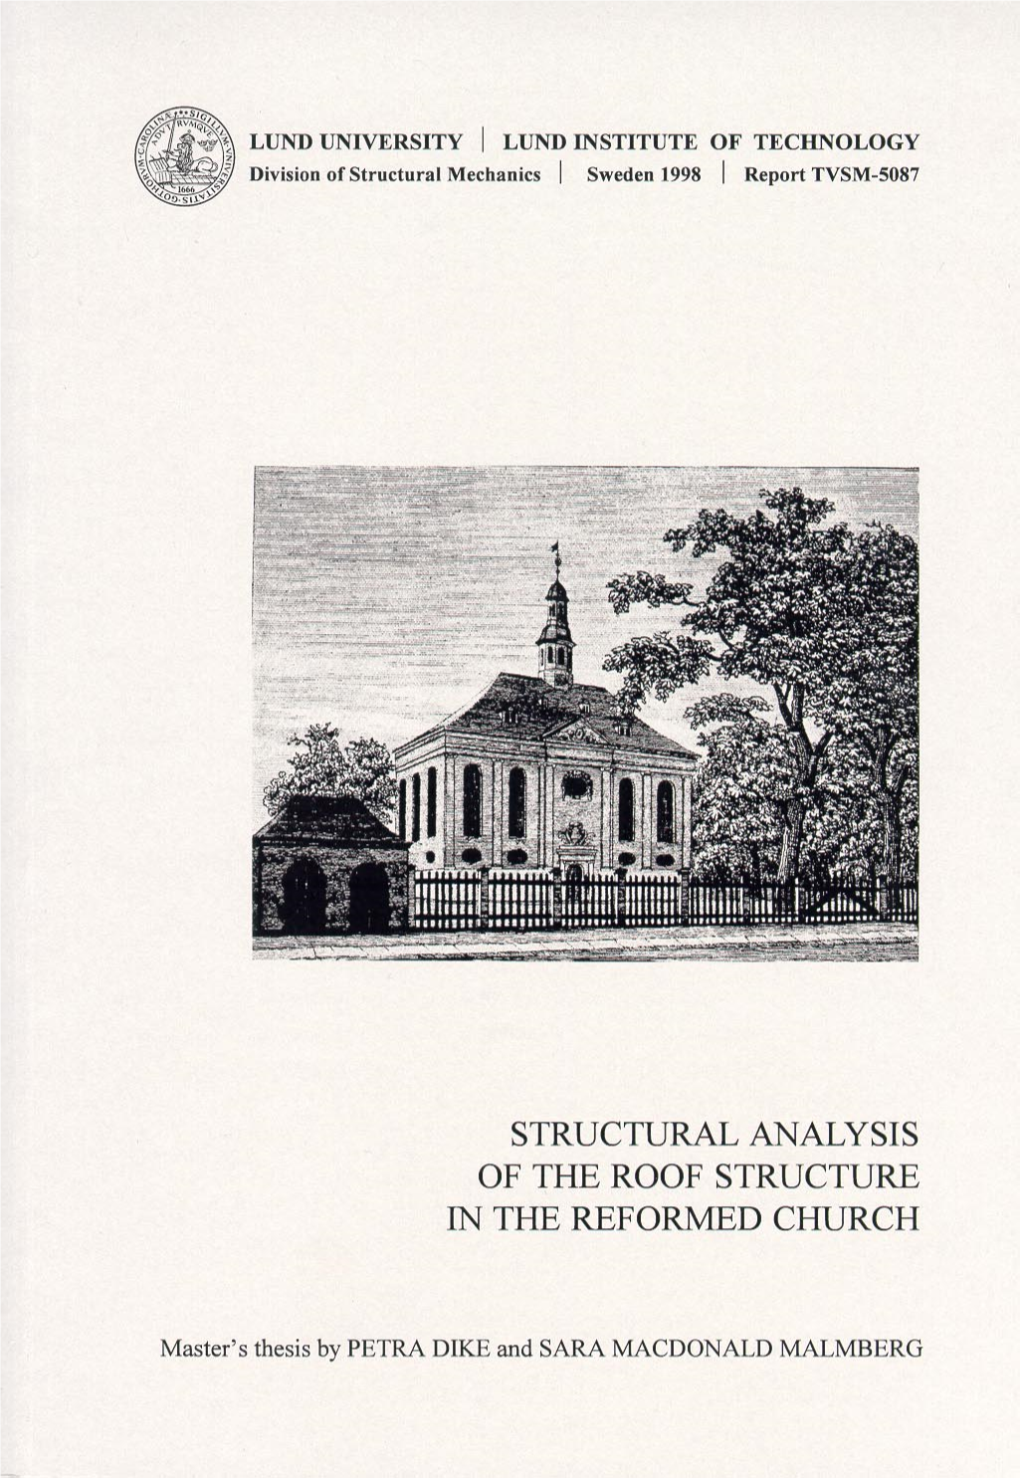 Structural Analysis of the Roof Structure in the Reformed Church